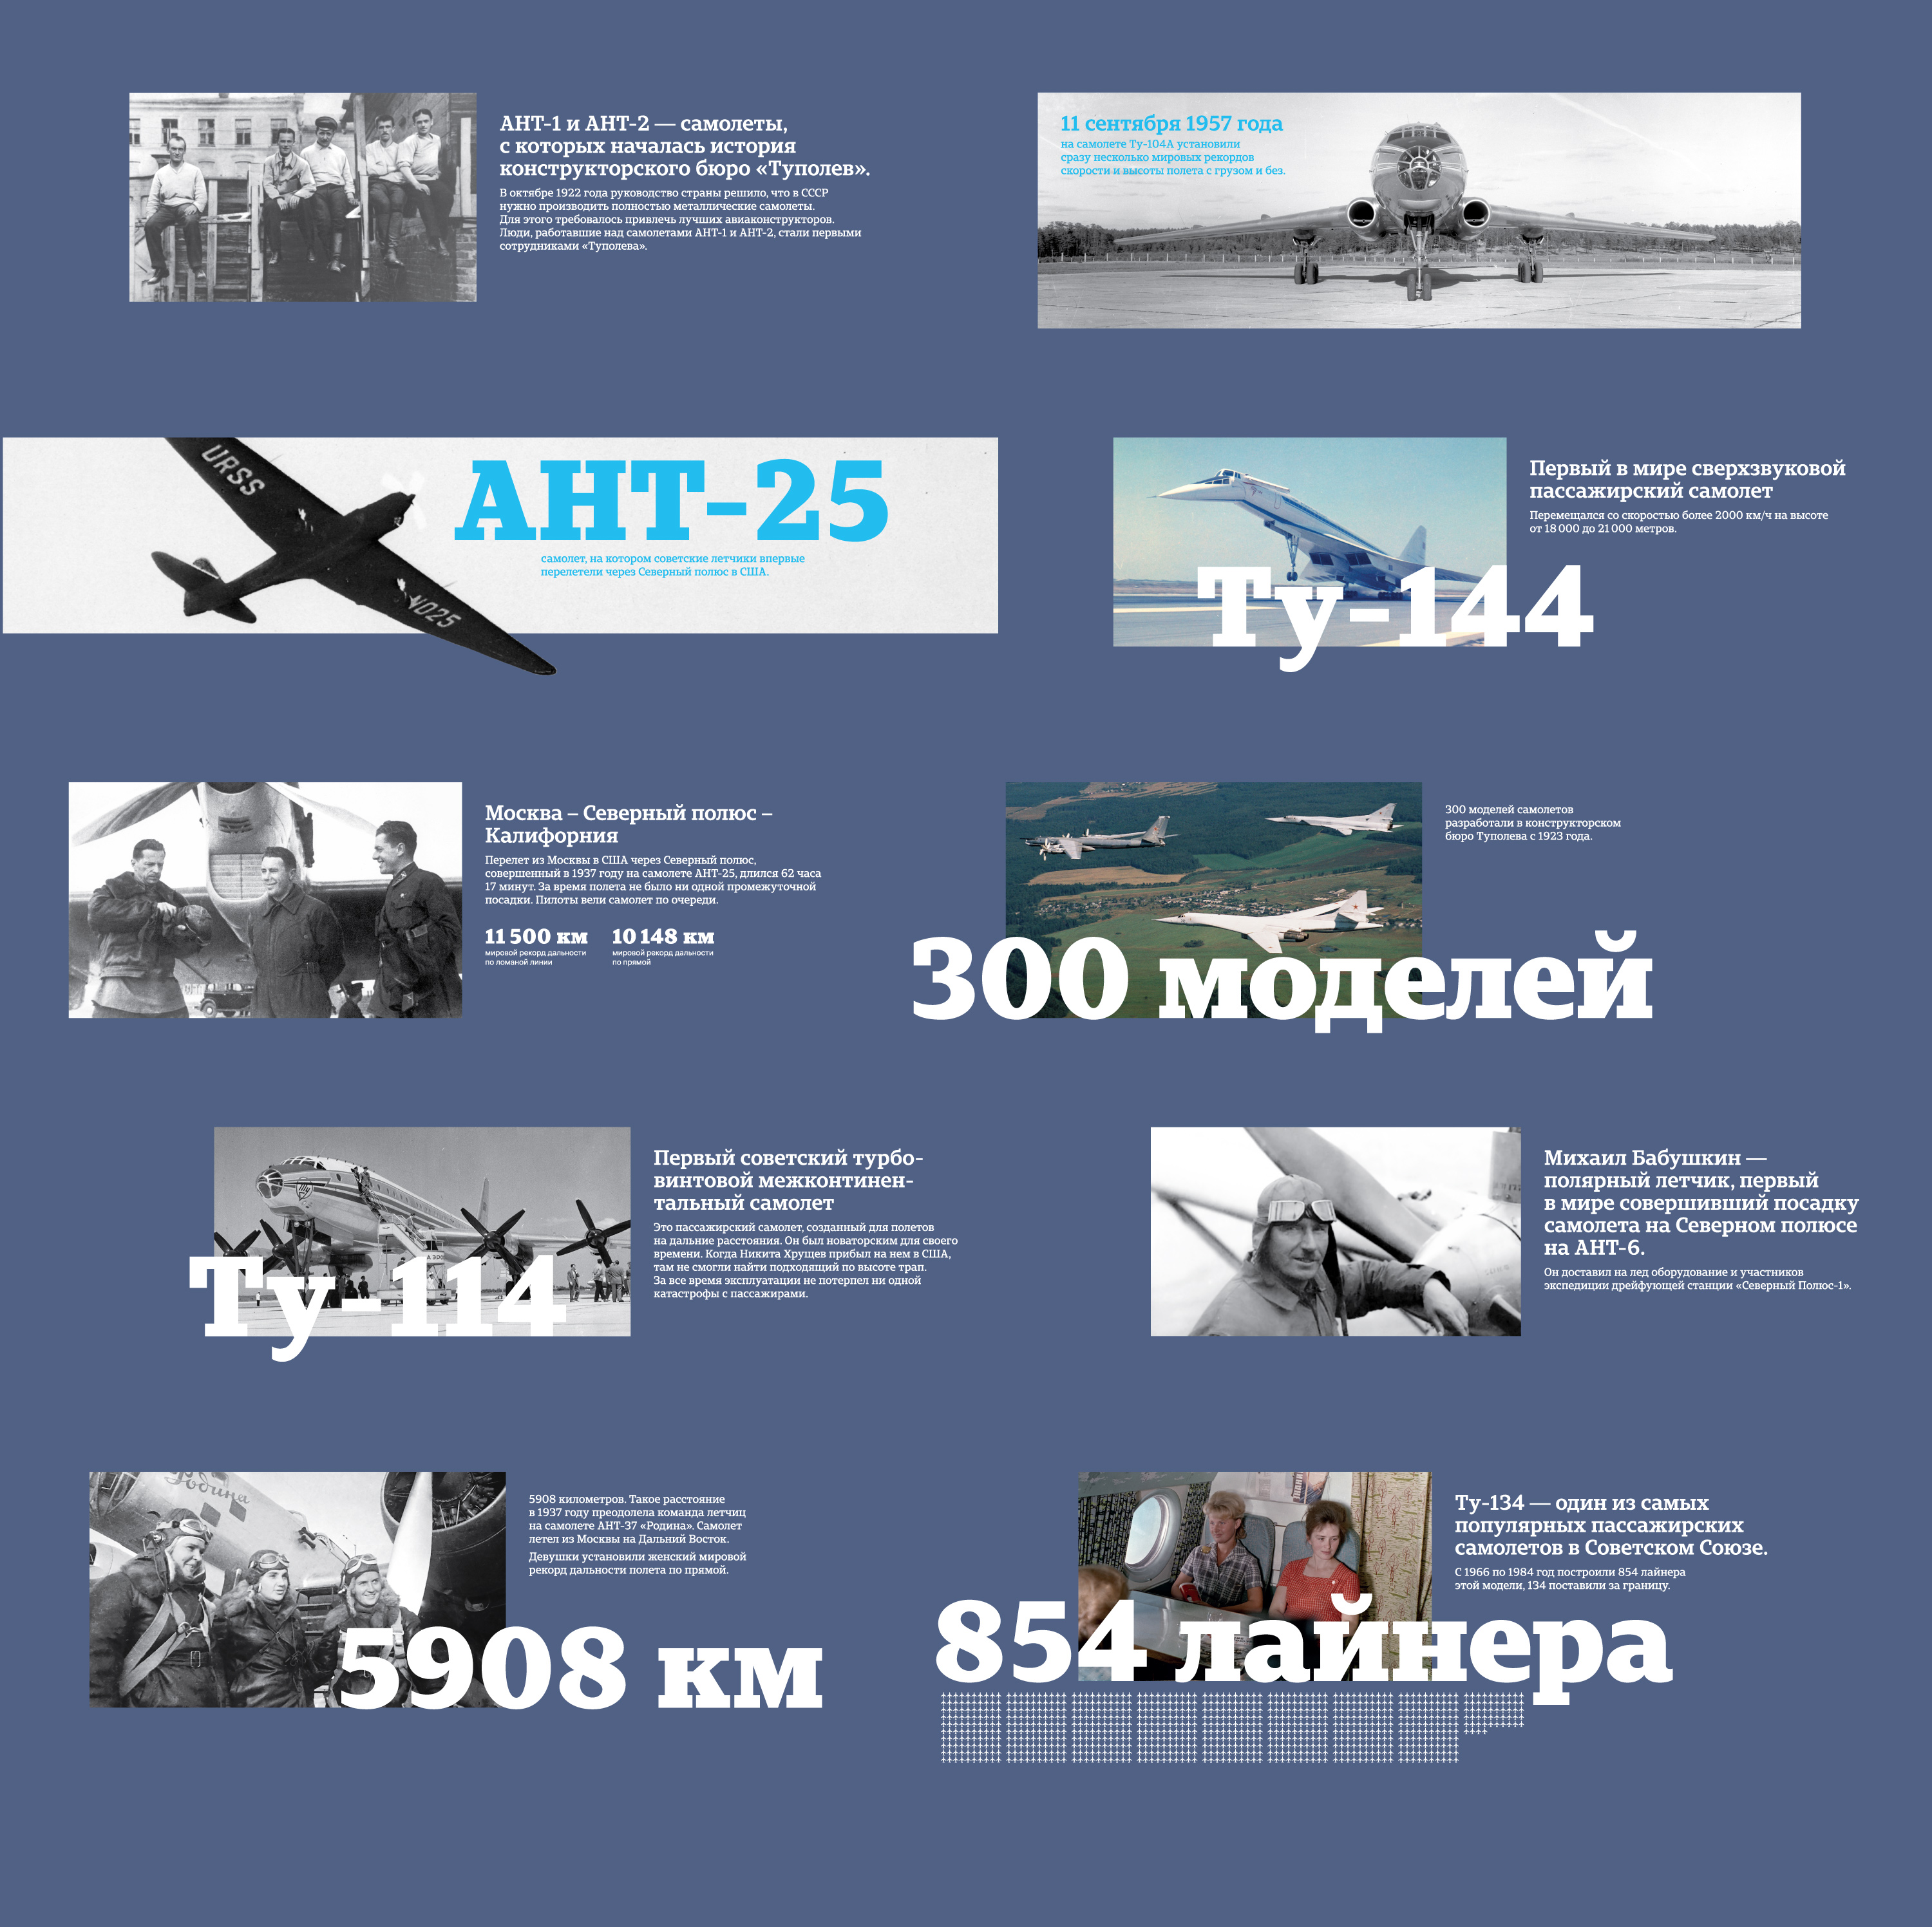 tupolev facts